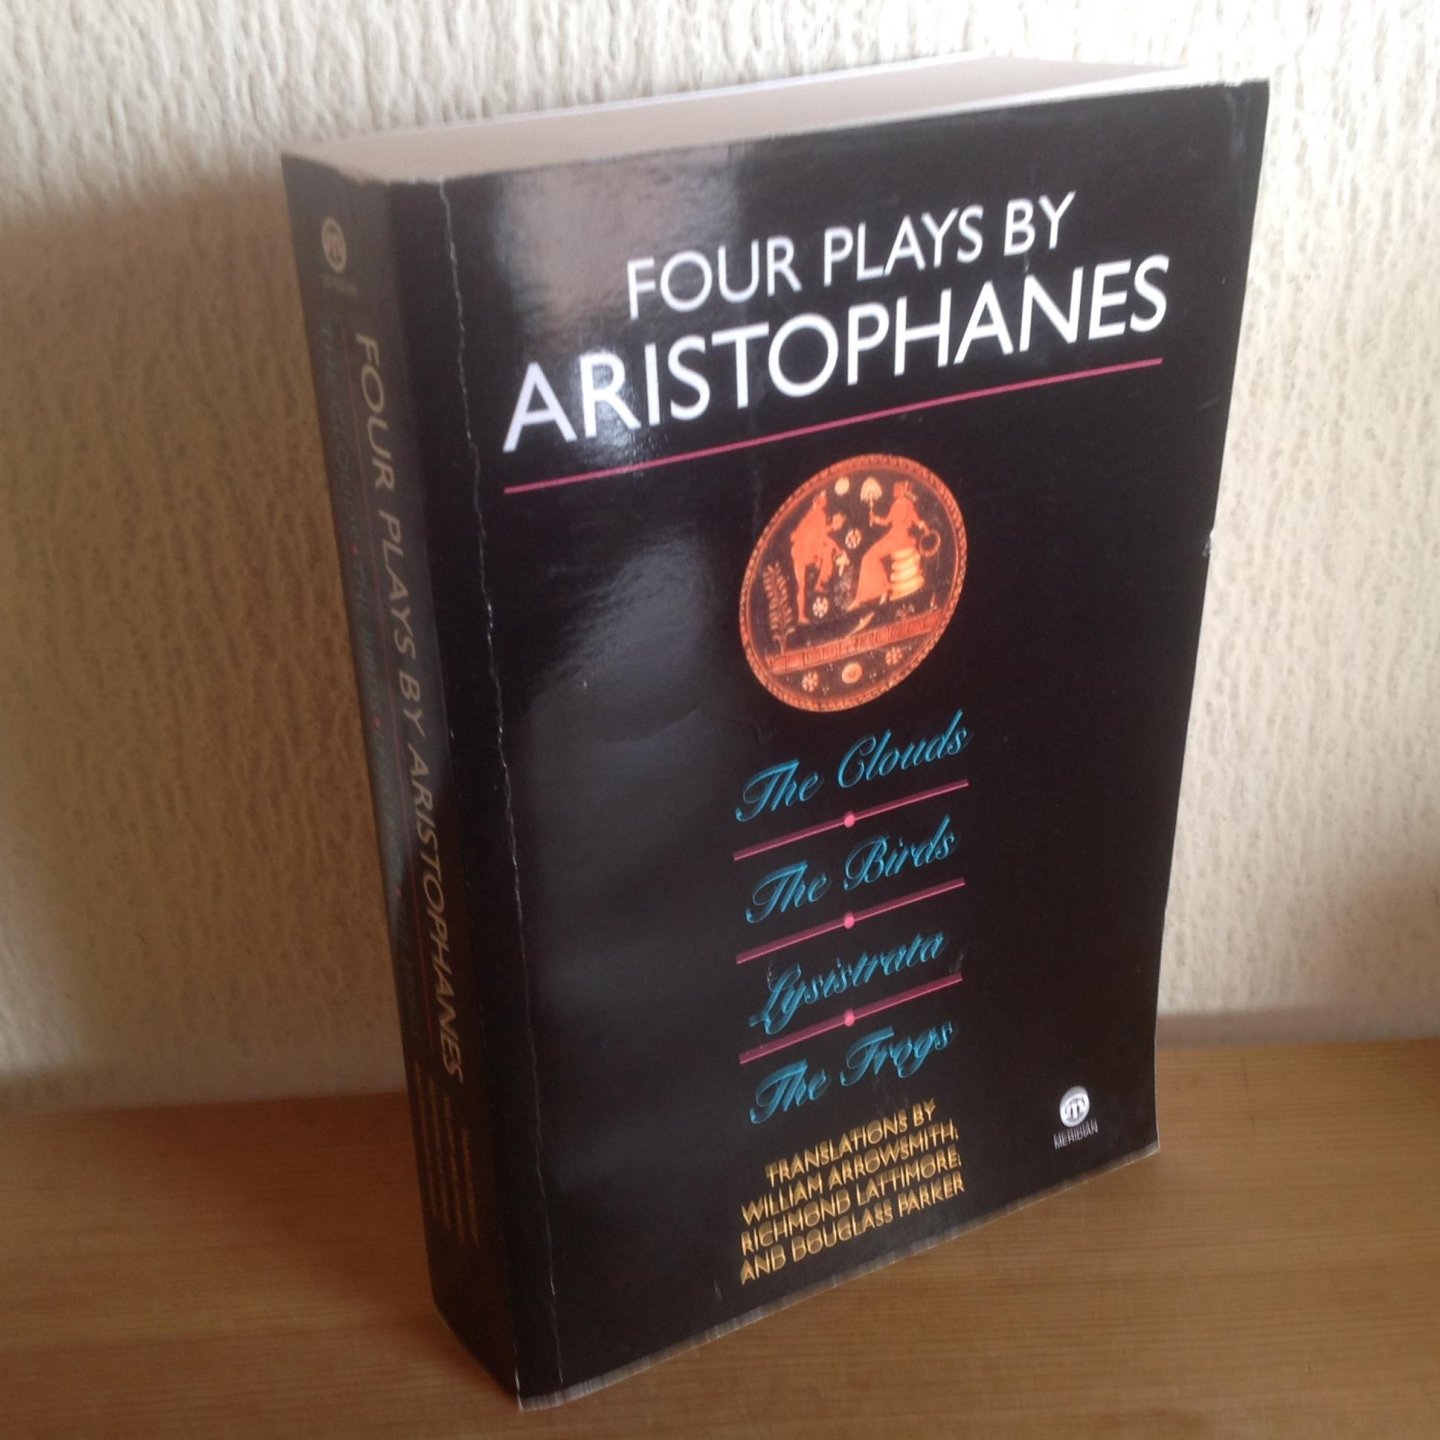 Aristophanes - Four Plays by Aristophanes / The Clouds, the Birds, Lysistrata, the Frogs